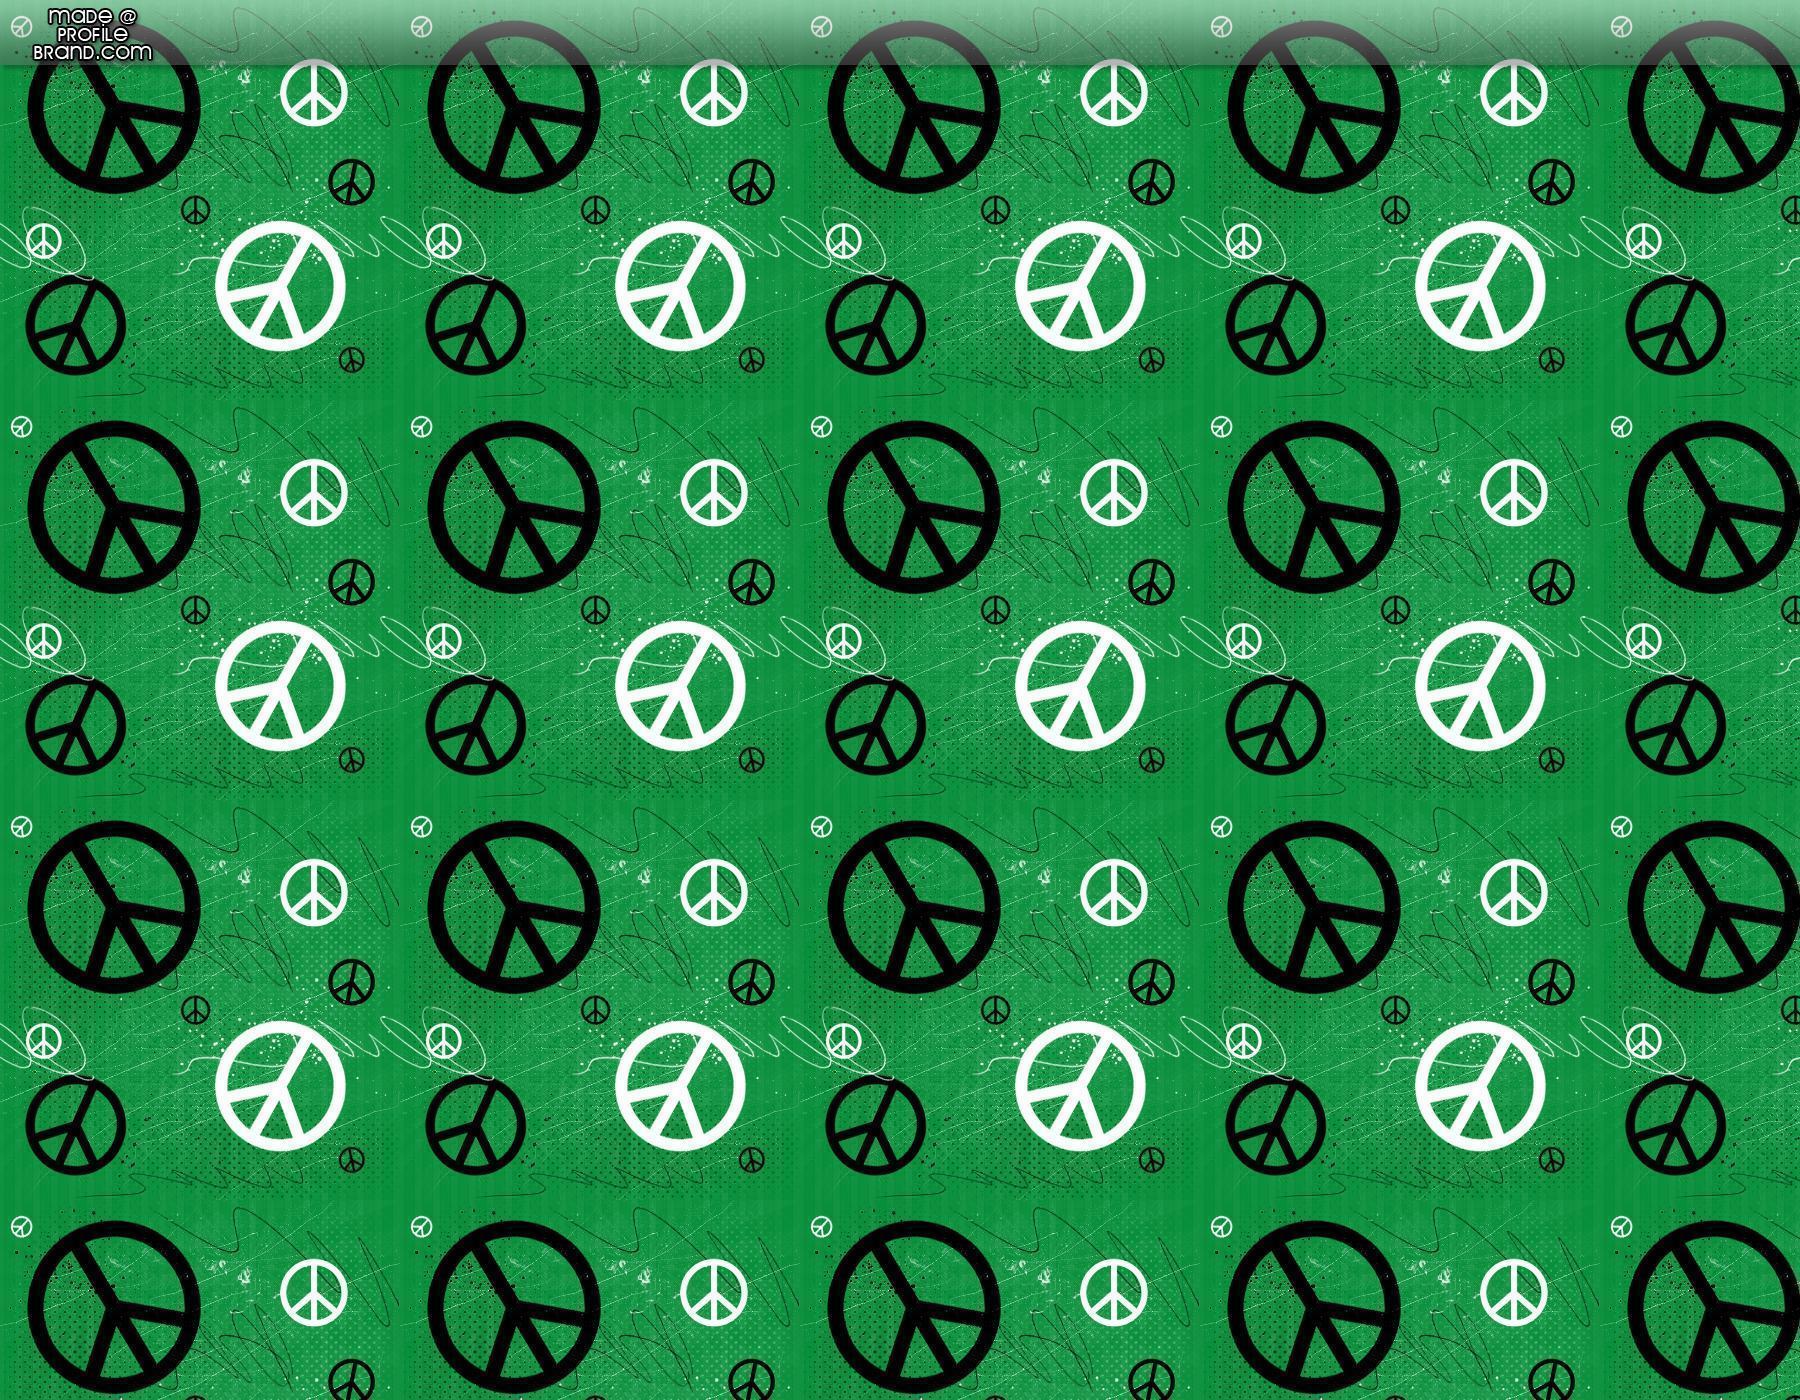 Can someone please find me a peace sign profile backgrounds